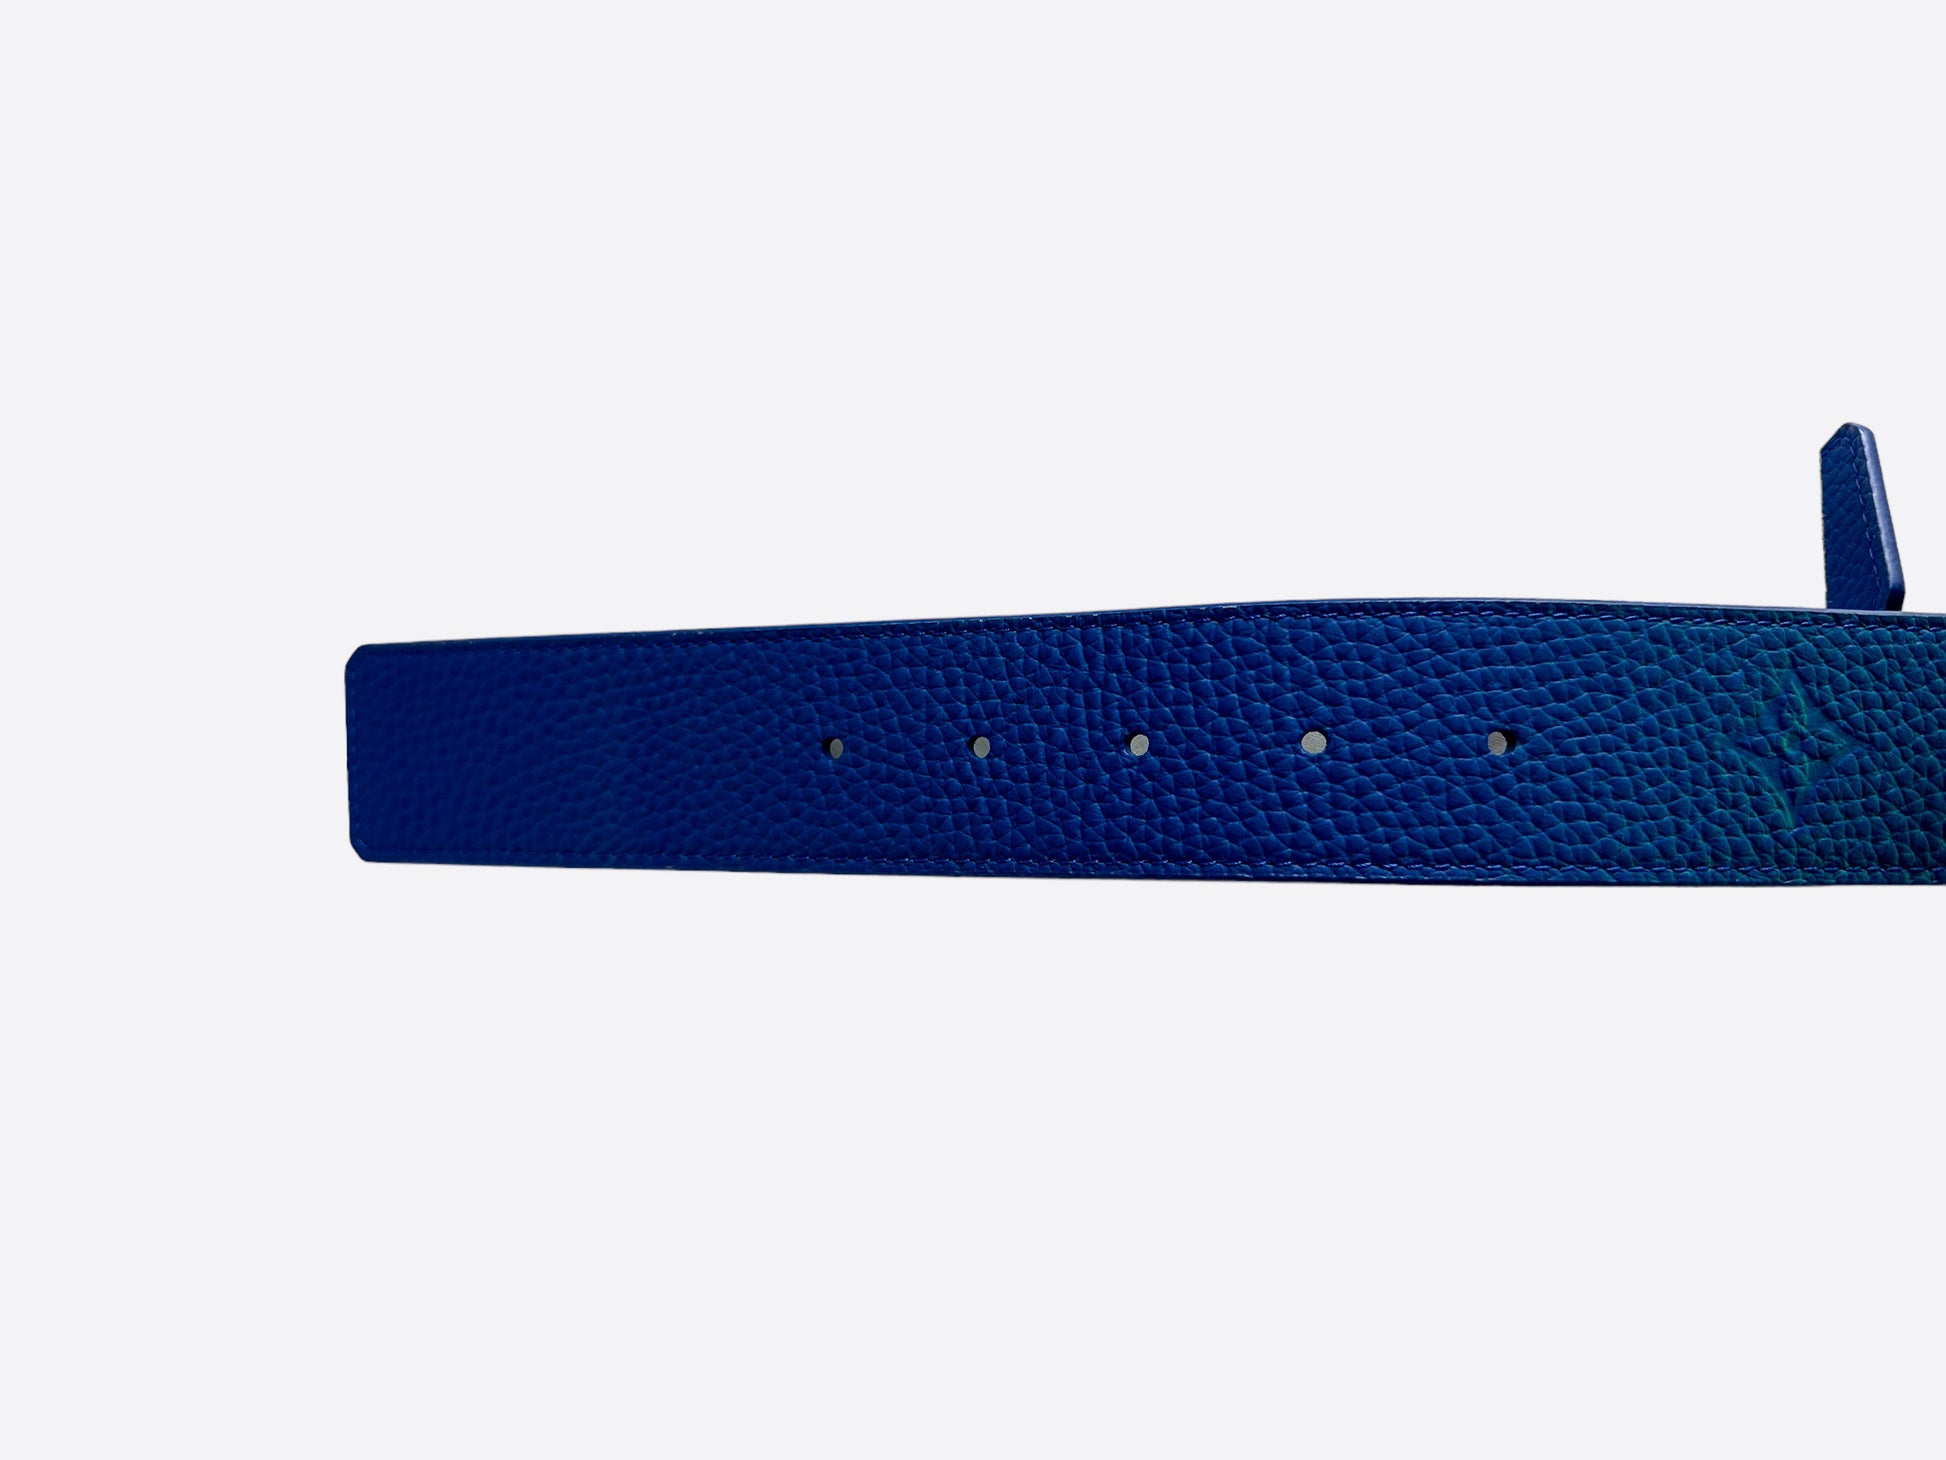 Splendid blue and green LV Initiales Taurillon Illusion belt